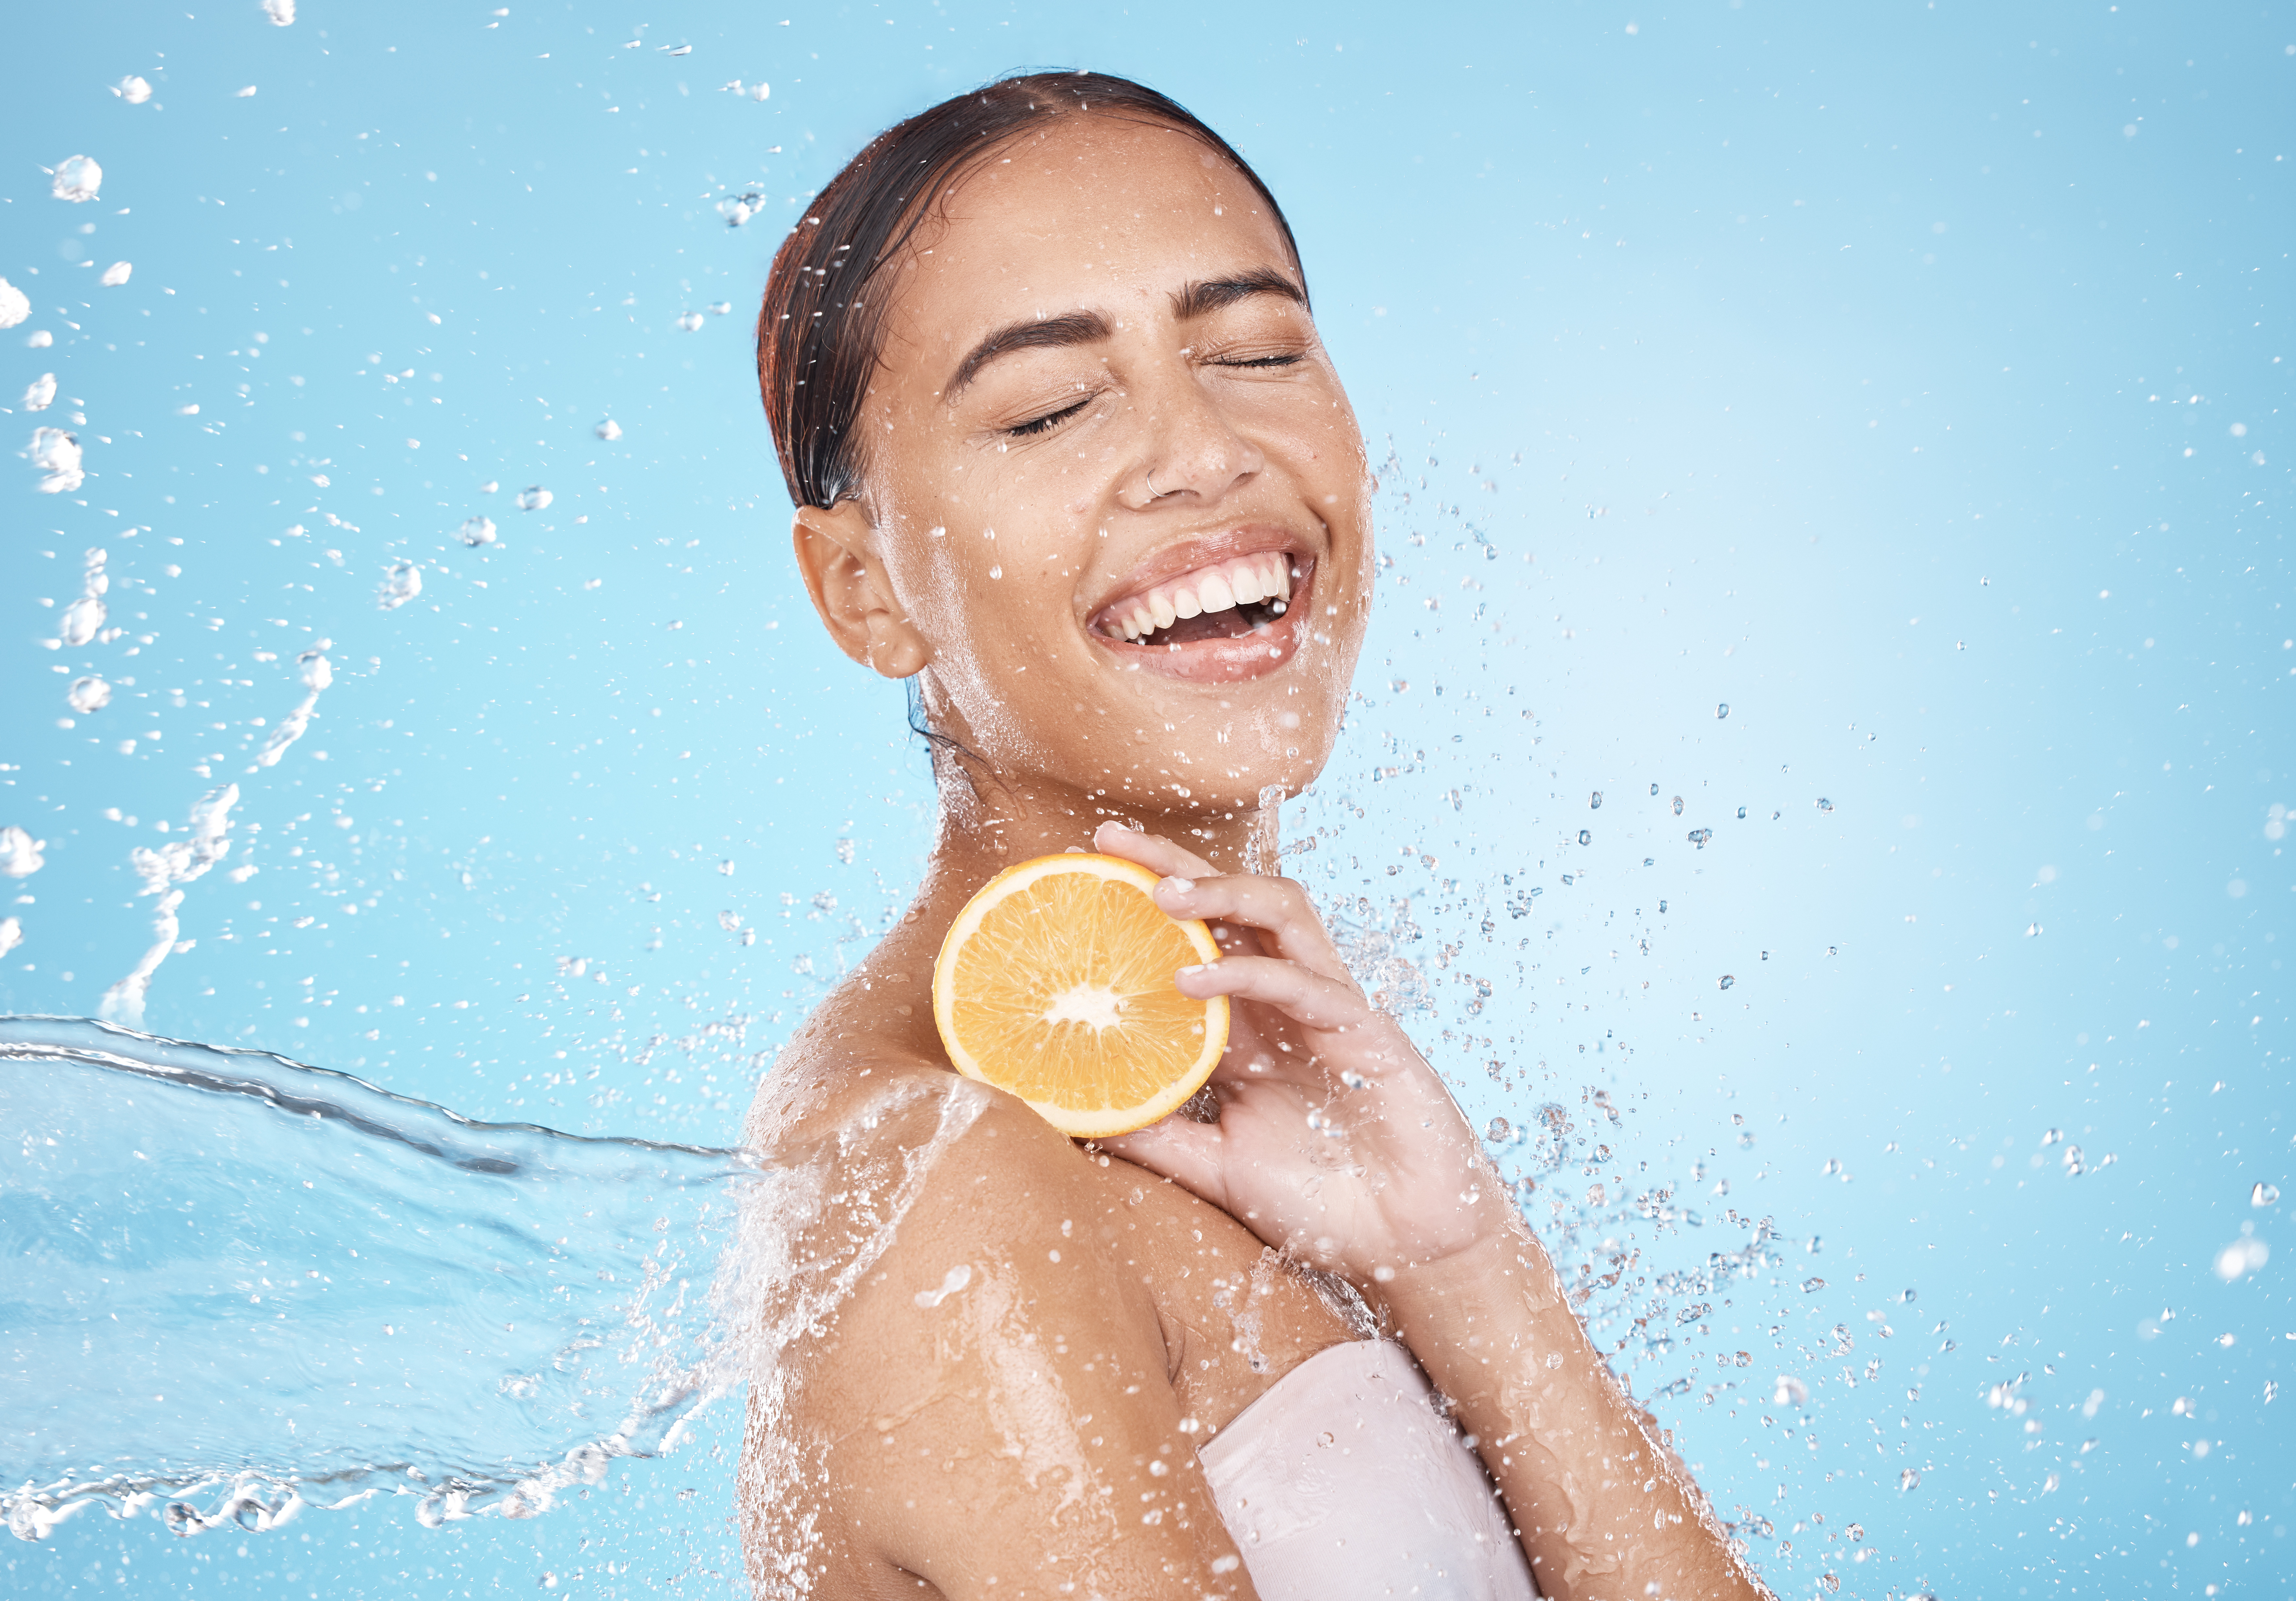 Water, lemon and woman with happy skincare, beauty or cosmetics product in studio or shower mockup for vegan advertising. Wellness model with fruit in hands and splash for healthy dermatology glow.